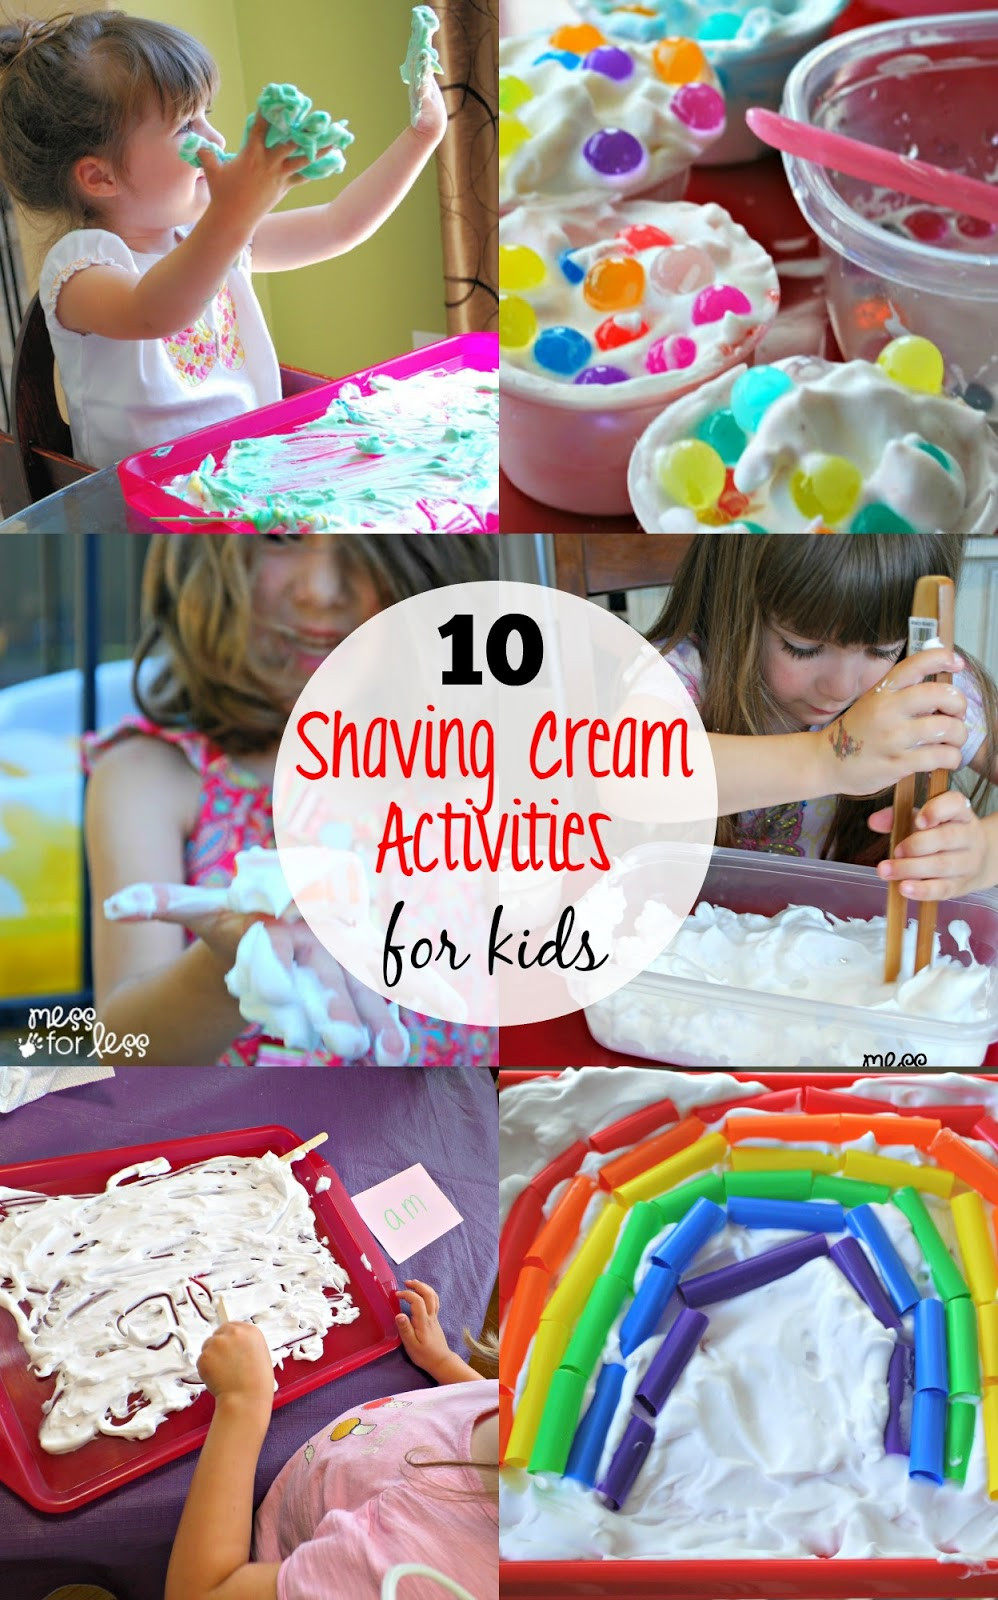 How To Projects For Kids
 10 Shaving Cream Activities for Kids Mess for Less